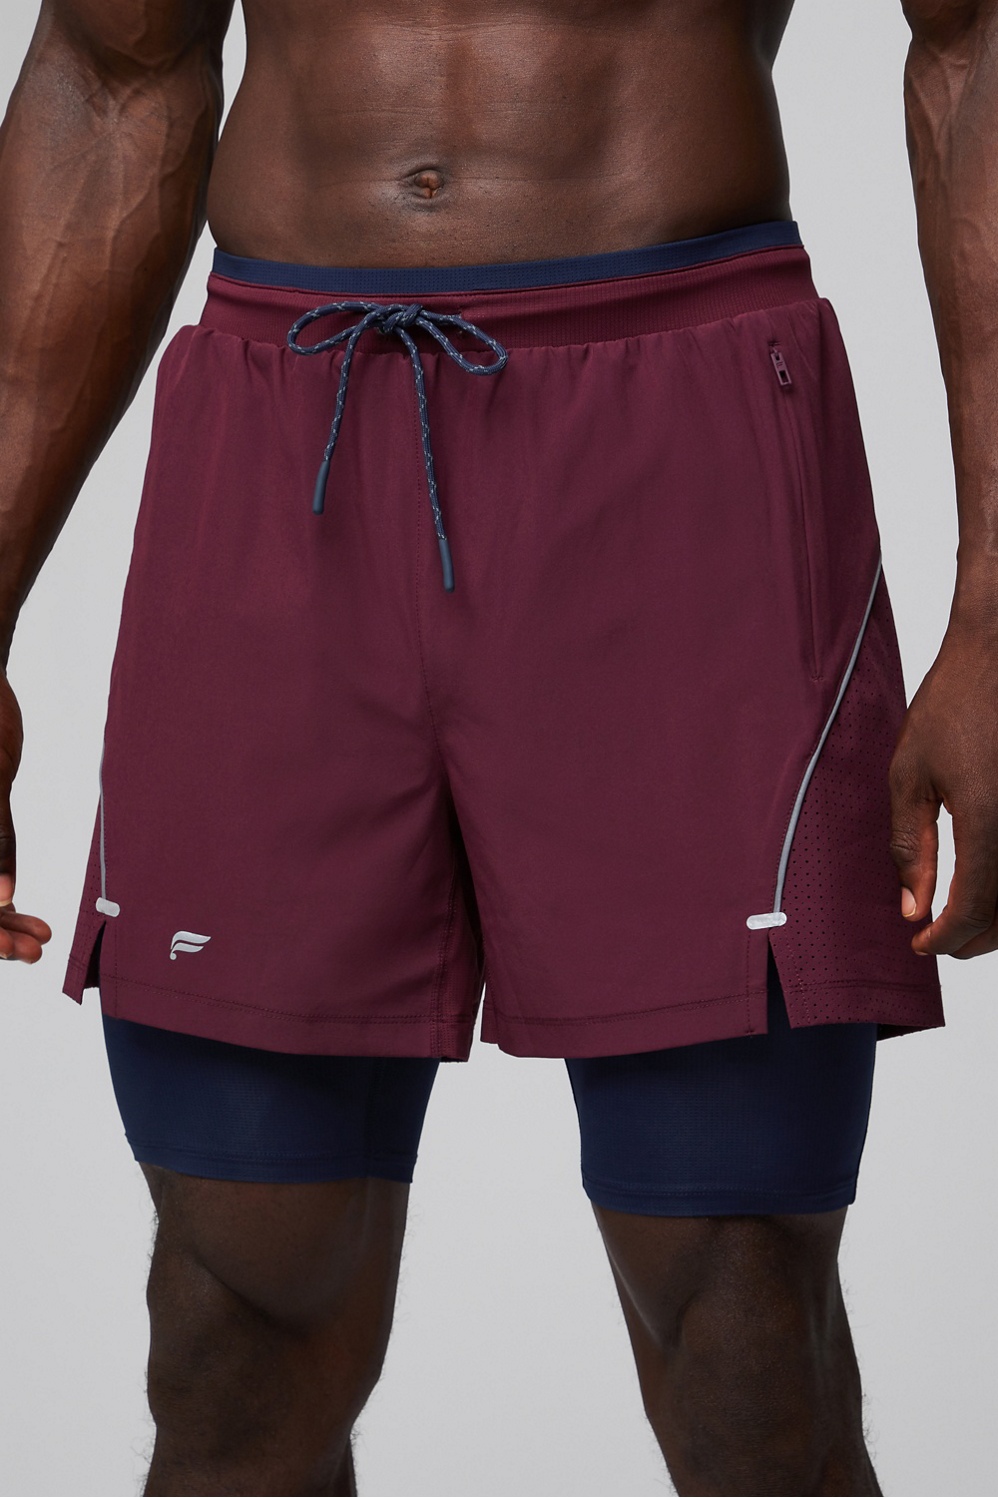 The Kadence Short Lined 5in